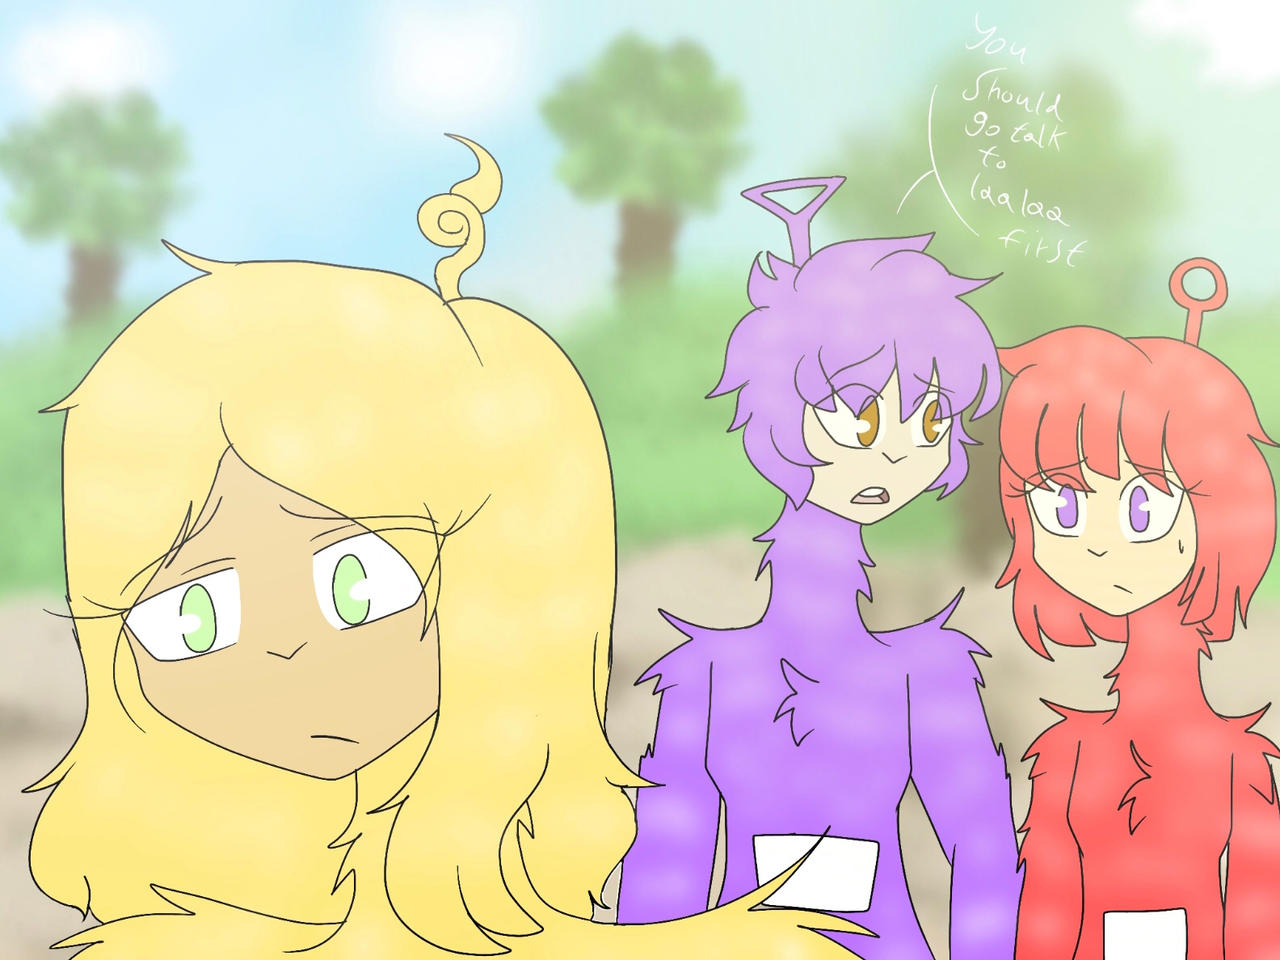 Slendytubbies 3 AU Whats with the face? by tylerrosestorey810 on